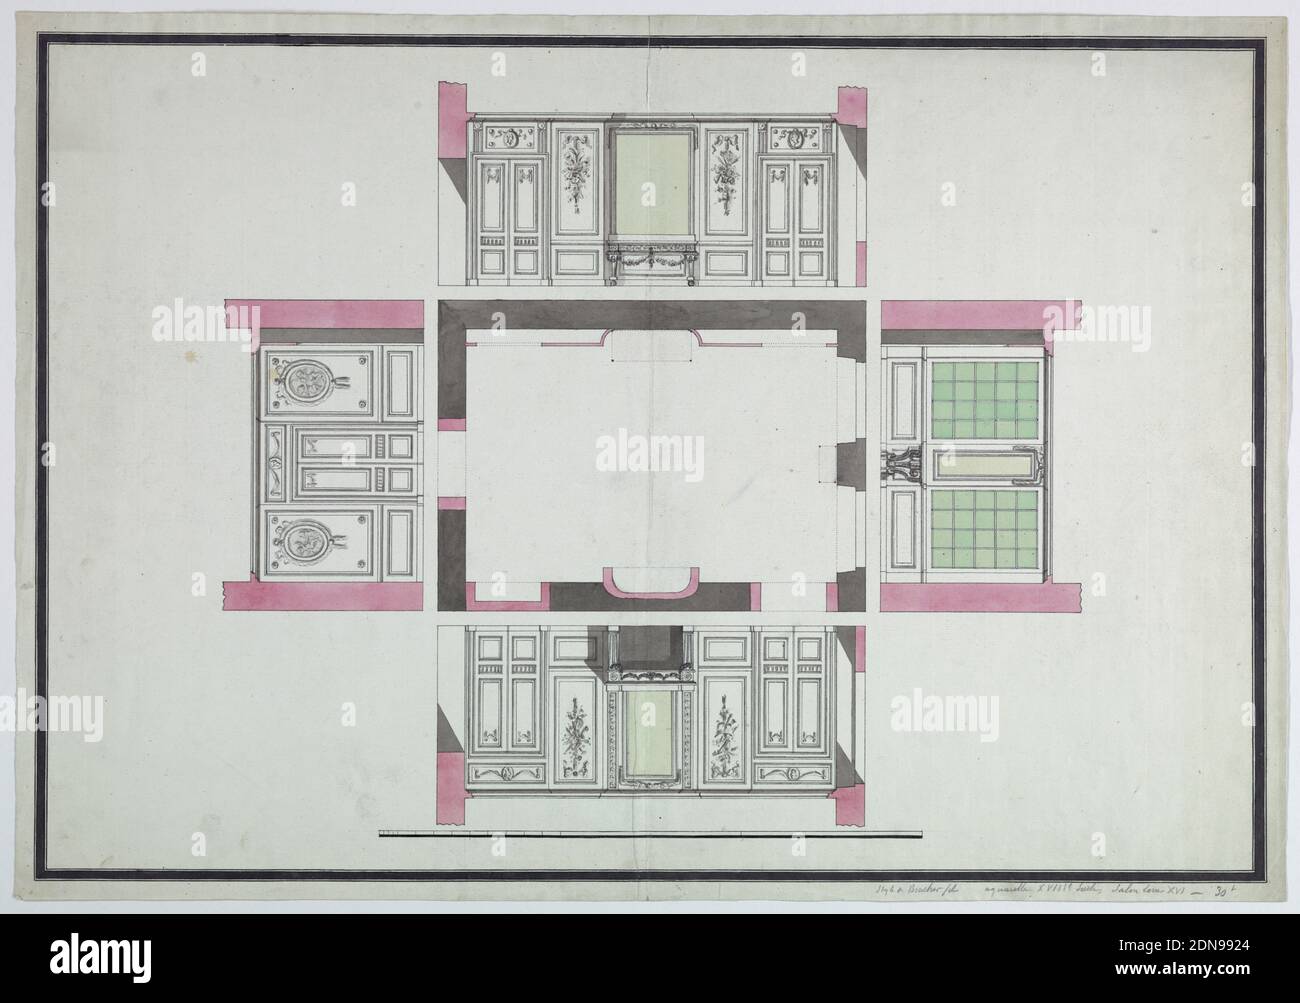 Design for Four Walls of a Salon, Pen and black ink, pink, green, black wash on ivory laid paper, ruled black in border, Elevation of four walls around the floor plan of a salon. Wall 1: fireplace; Wall 3: Windows; Wall 3: center door; wall 4: mirror flanked by pair of doors. Inscribed in pencil at lower margin: Style de Boucher fils - aquarelle XVIIIe siecle, salon Louis XVI - 30L; inscribed in pencil on verso: Dessin de XVIIIe s, interieur XVIIIe siecle - Guerinil - 7e, France, ca. 1780–90, architecture, interiors, Drawing Stock Photo